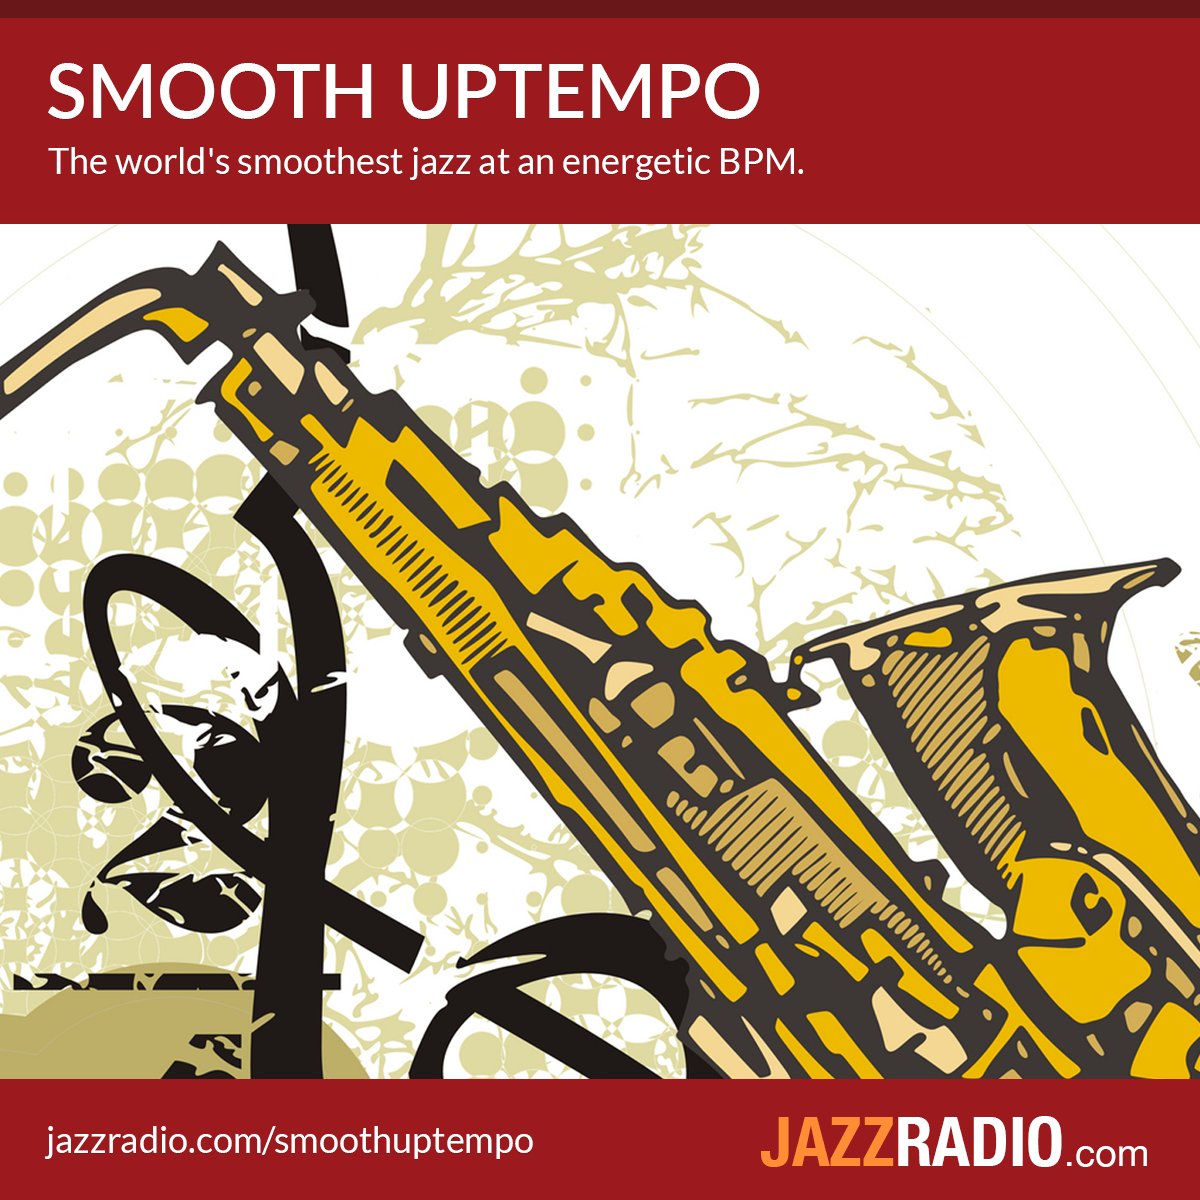 Try out the terrific tunes on ‘Smooth Uptempo’ – The world's smoothest jazz at an energetic BPM! This music will keep you grooving 24 hours a day:
JAZZRADIO.com/smoothuptempo

#SmoothUptempo #SmoothUptempoJazz #UpbeatJazz #SmoothJazz #JazzRadio #Jazz